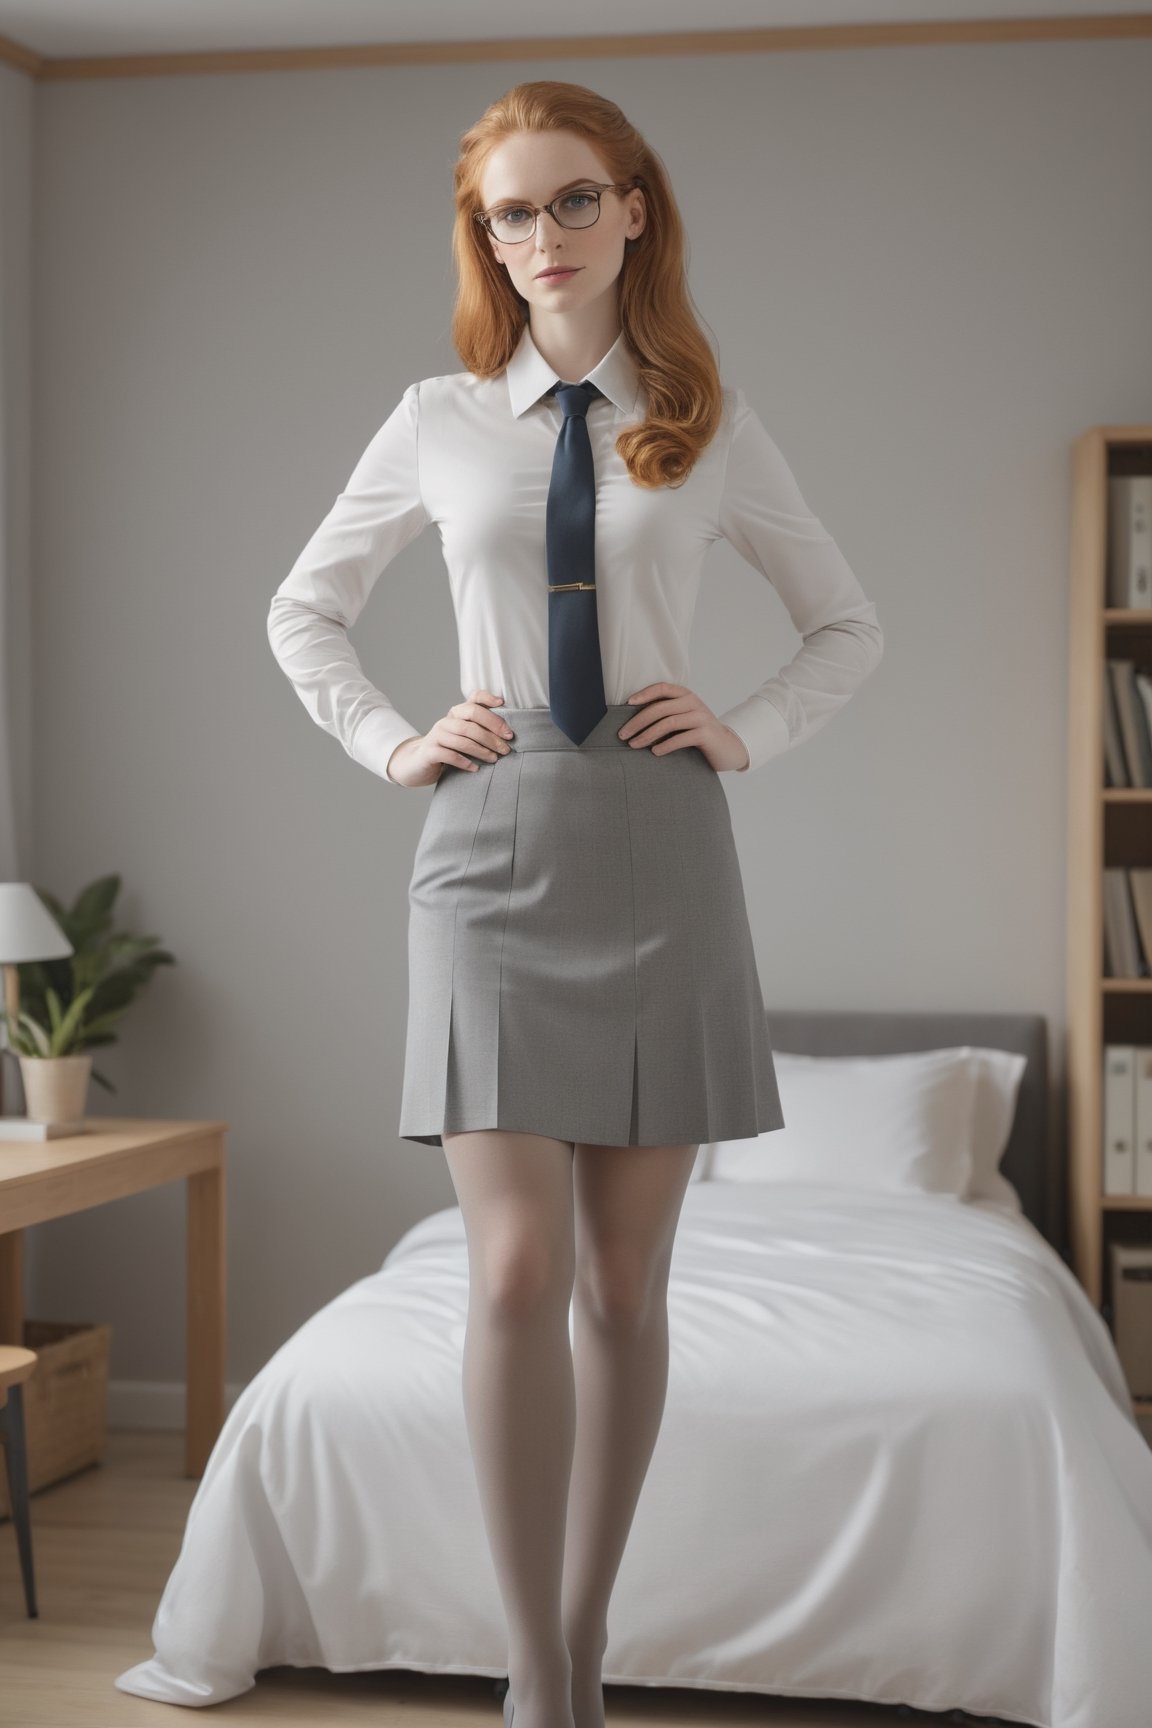 (NSFW), raw full body photograph, (bedroom environment), pretty office 35 years old lady, pretty face, ginger, eyeglasses, (elegant office outfit:1.2), (gabardine skirt:1.3), 5 deniers grey pantyhose, two gentleman standing by, realistic, 